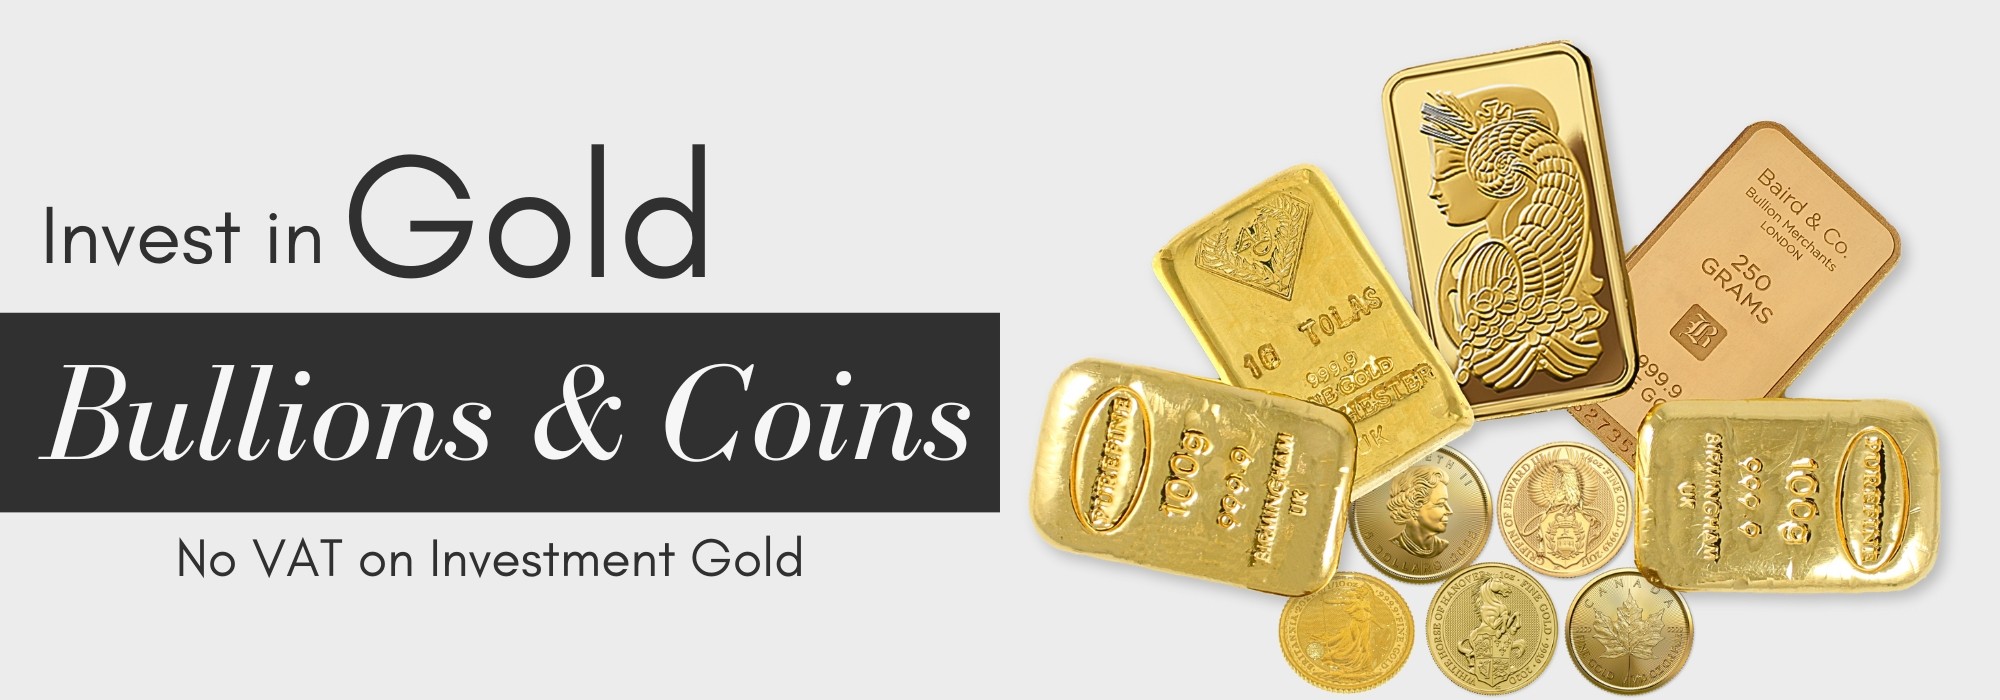 43_Invest in Gold Bullion and Coins.jpg